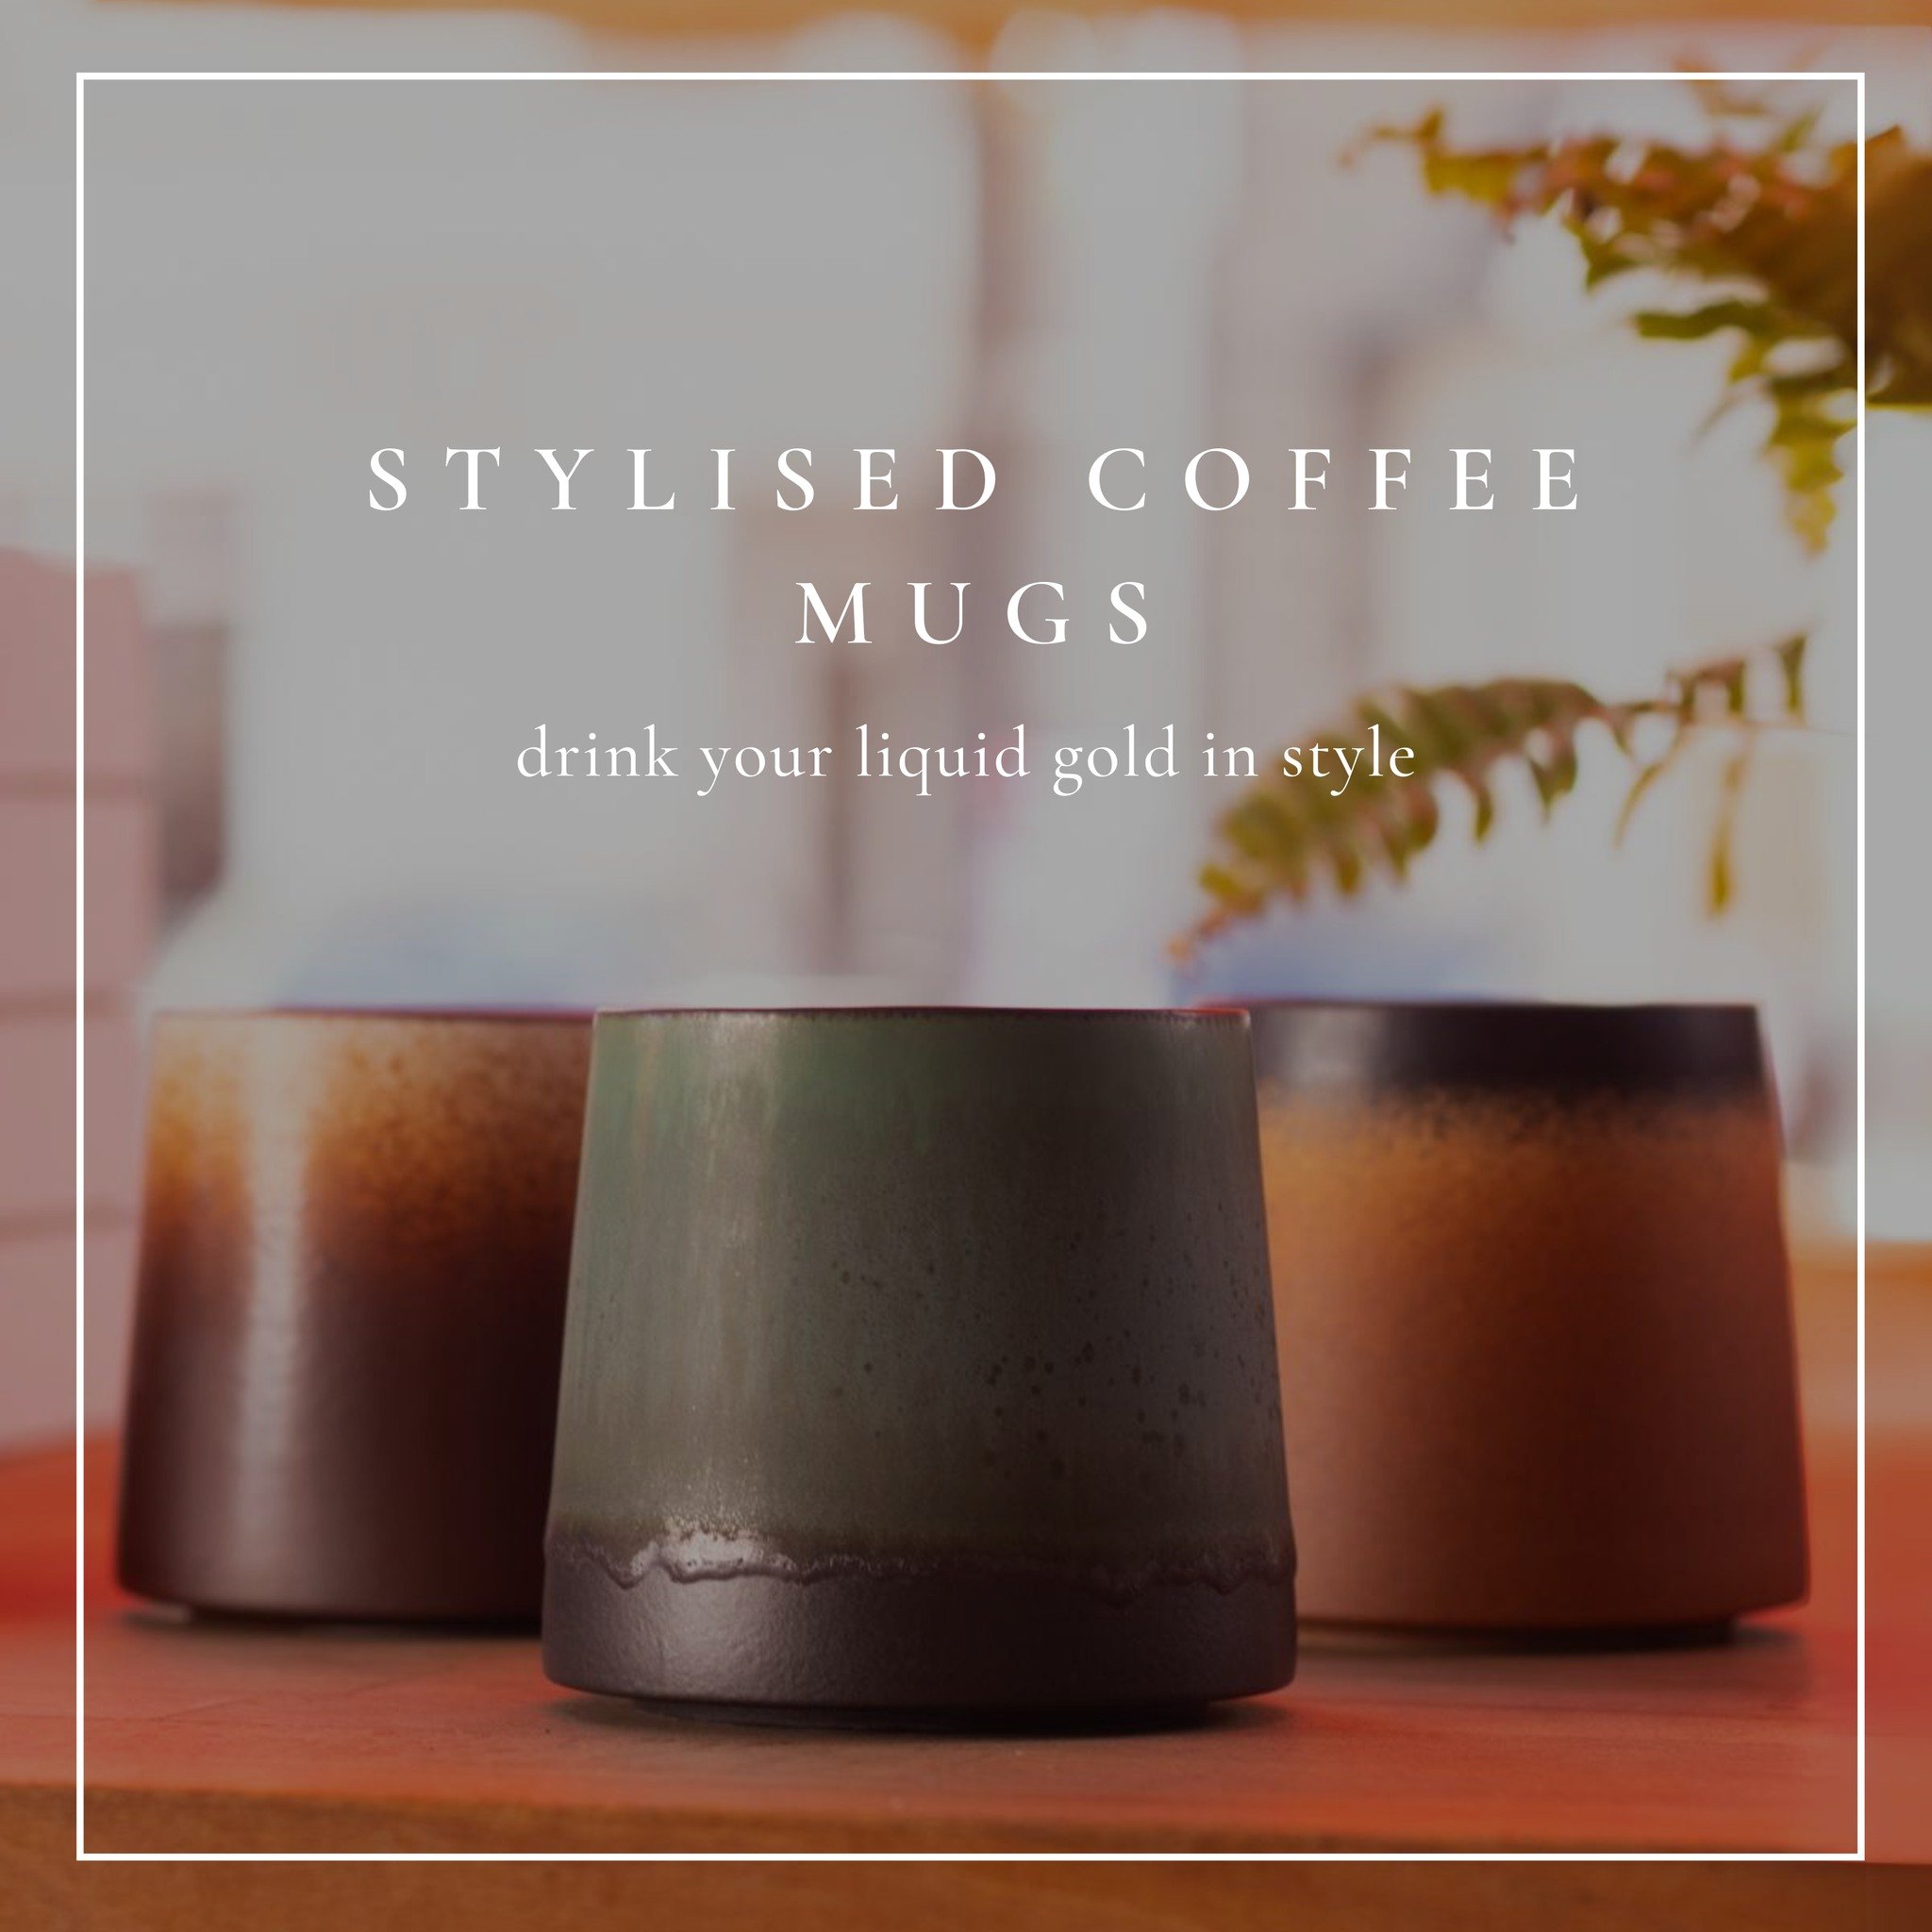 These stylish coffee mugs are a game-changer for your morning routine! ☕️💫 Adding some flair to your cup of joe has never been easier. Elevate your coffee experience with these trendy mugs, buy online or in store today!🌟🥰

#CoffeeLover #MorningRit